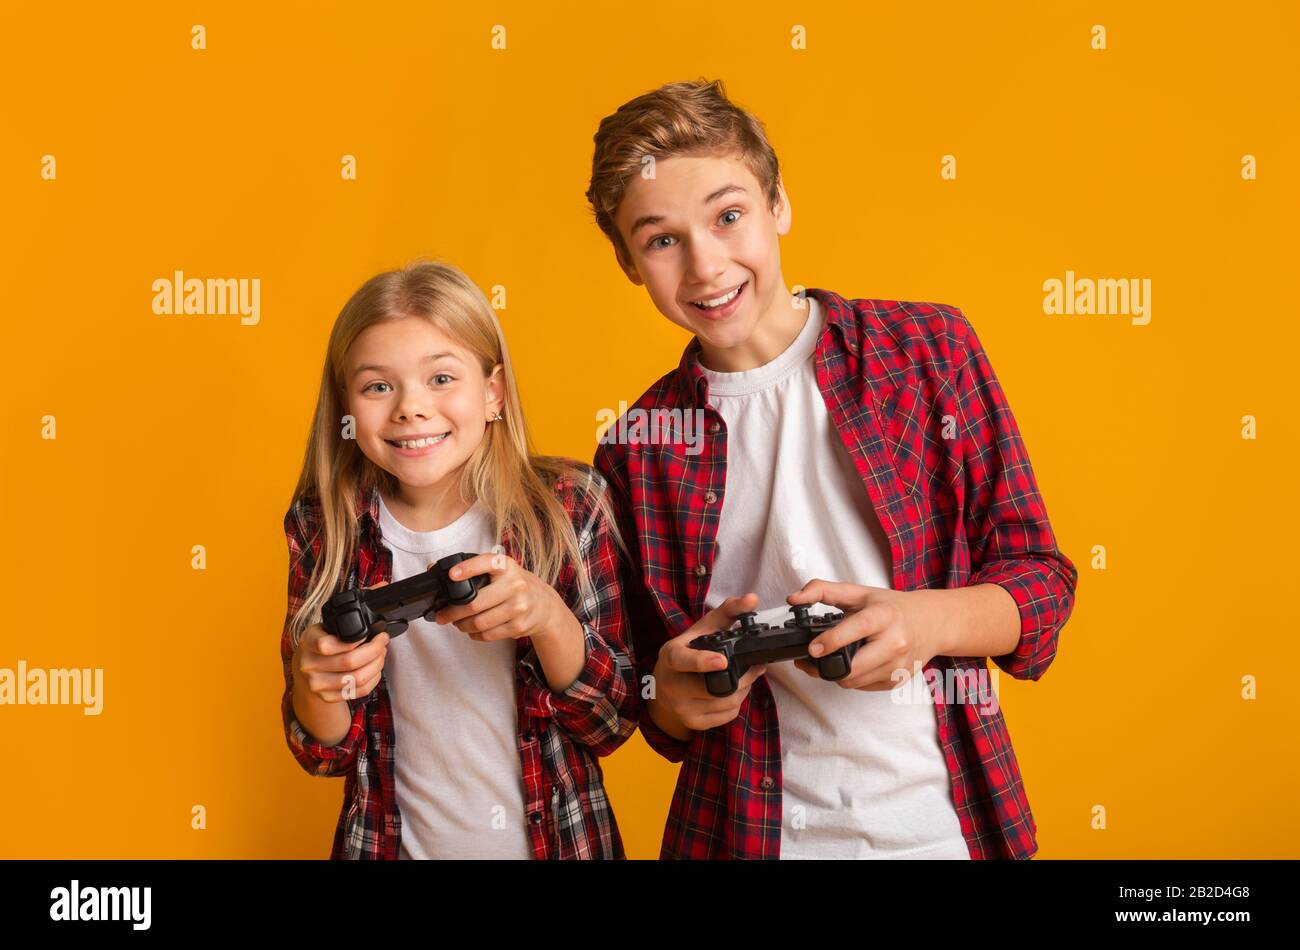 Kids Leisure. Brother And Sister With Joysticks Posing Over Yellow Background Stock Photo